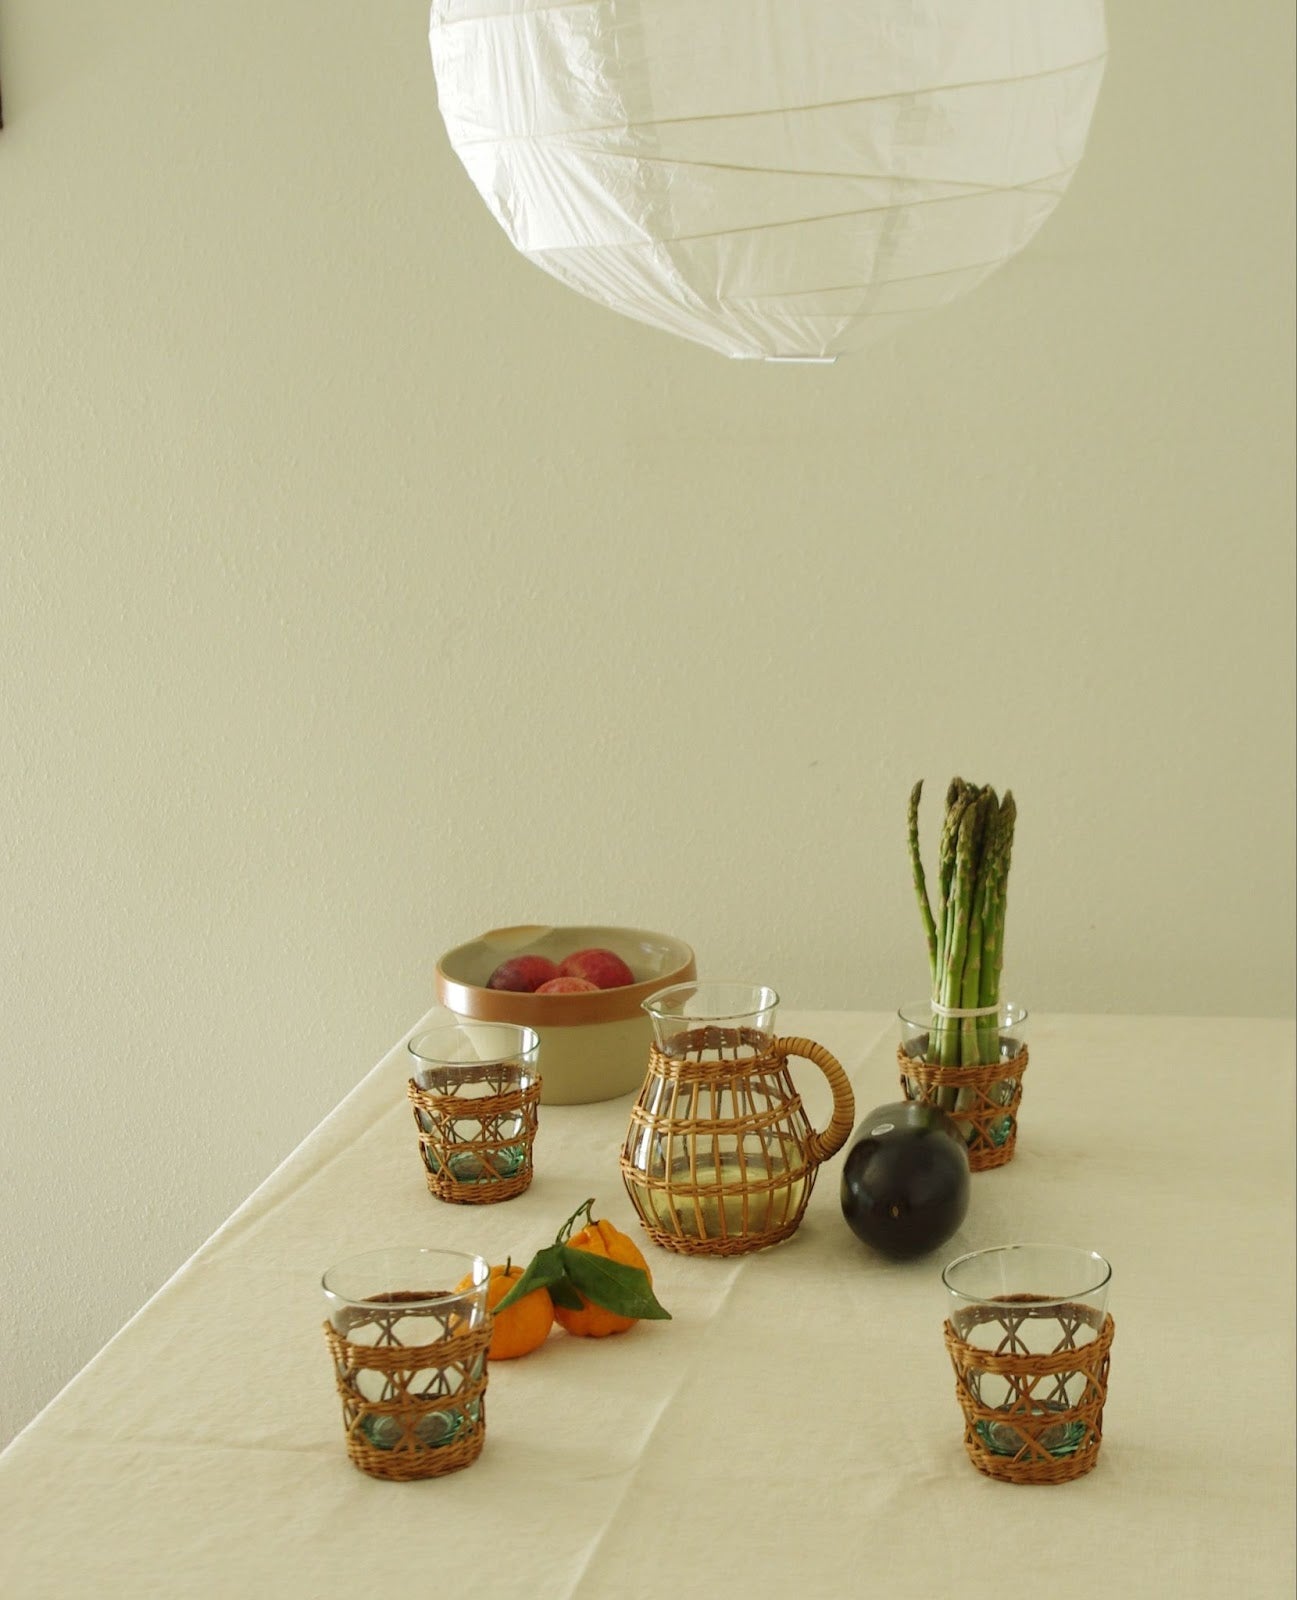 Rattan wrapped glassware on table under paper lantern.